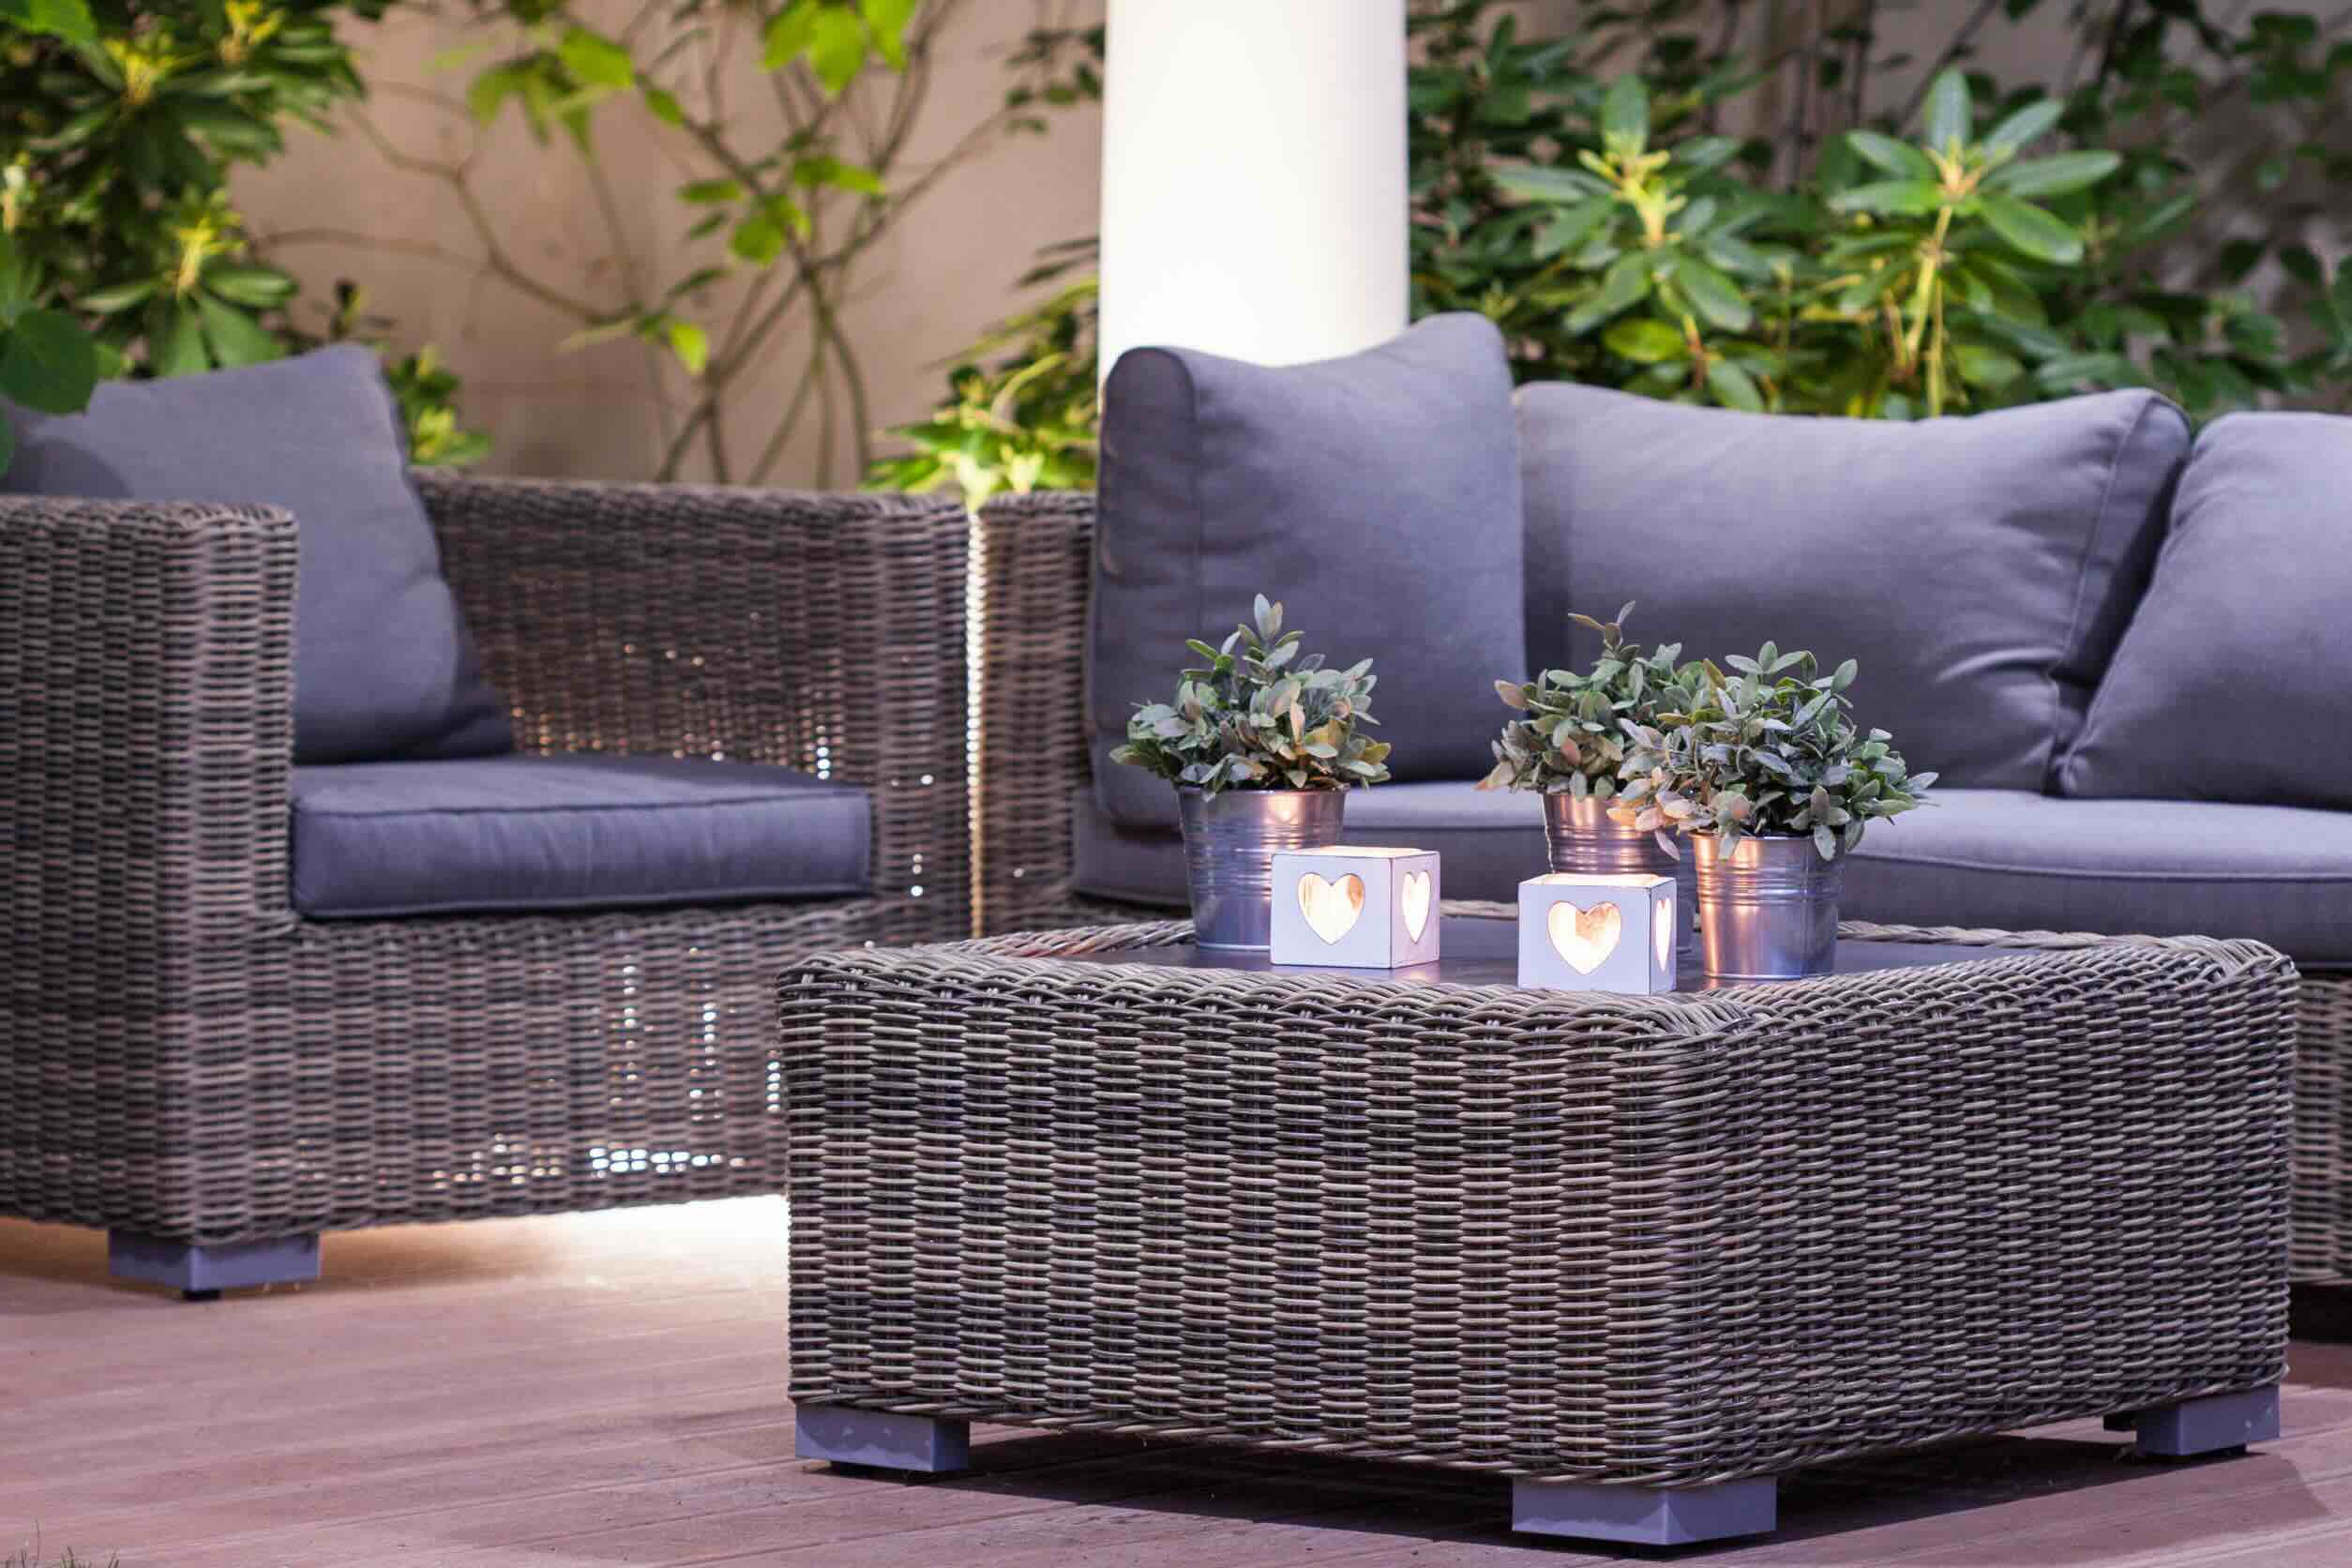 How To Recover Patio Cushions